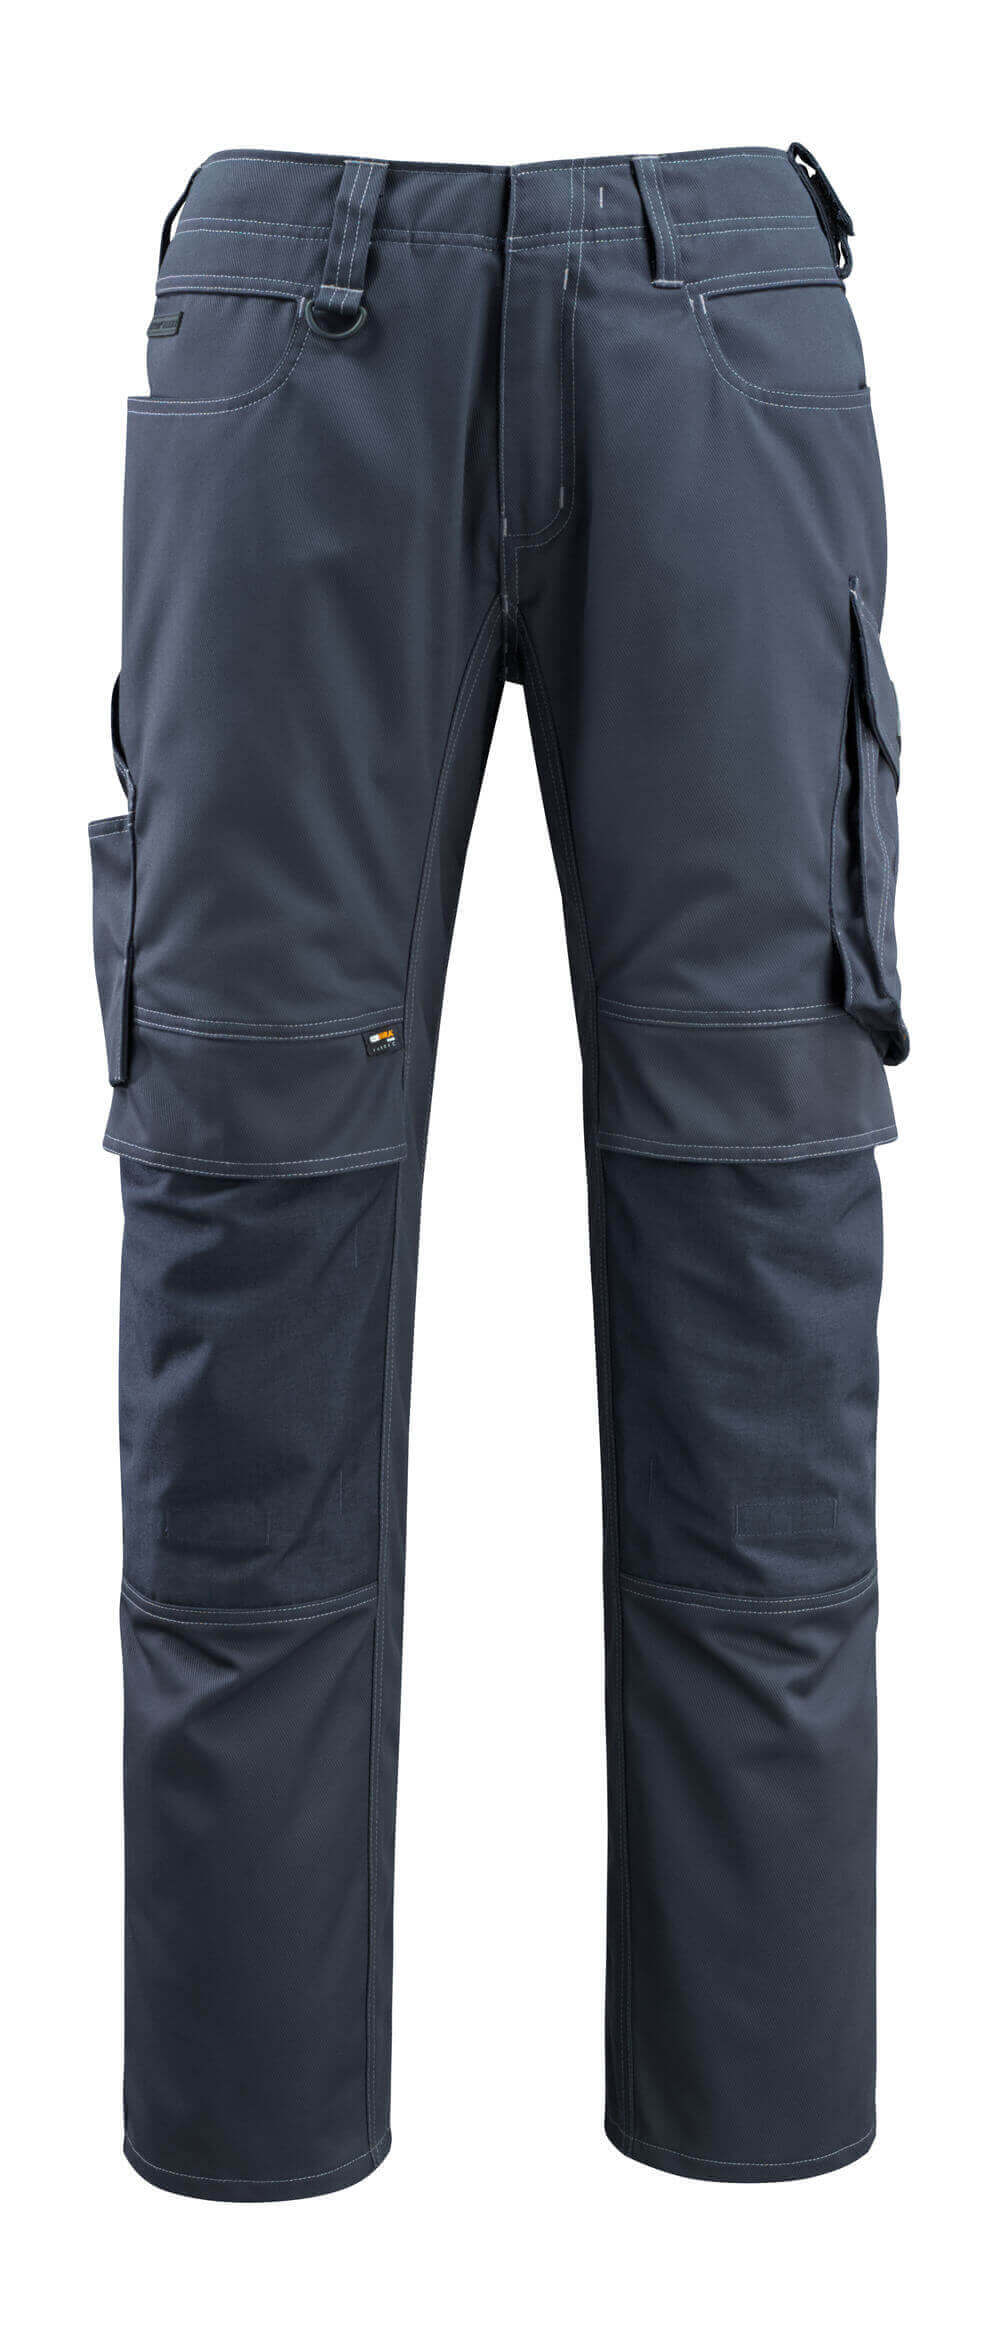 MASCOT®UNIQUE Trousers with kneepad pockets Erlangen 12479 - DaltonSafety